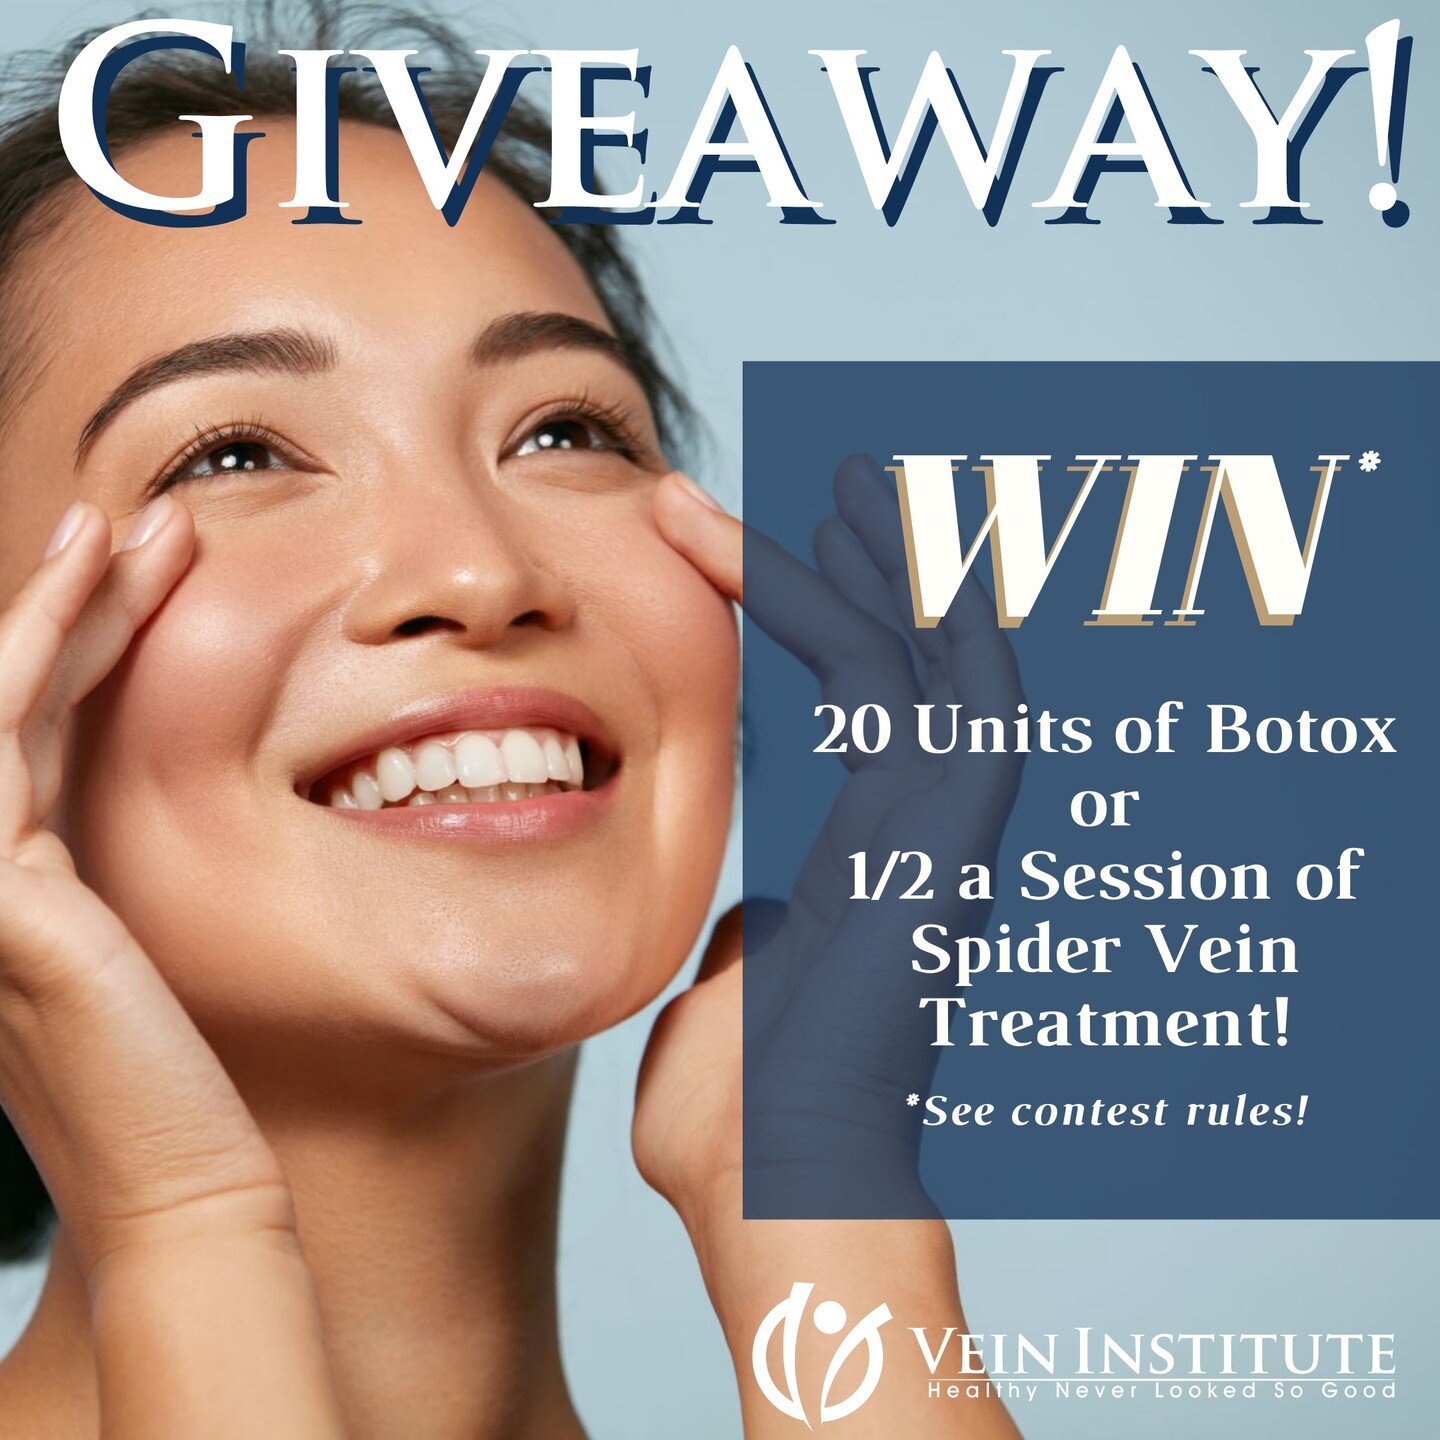 🎉In honor of National Vascular Disease Awareness Month, we are celebrating by doing an amazing giveaway!
Our giveaway* includes a choice of 20 Units of Botox or 1/2 a Session of Spider Vein Treatment!

To enter:
&bull; Follow us on Instagram @VeinIn